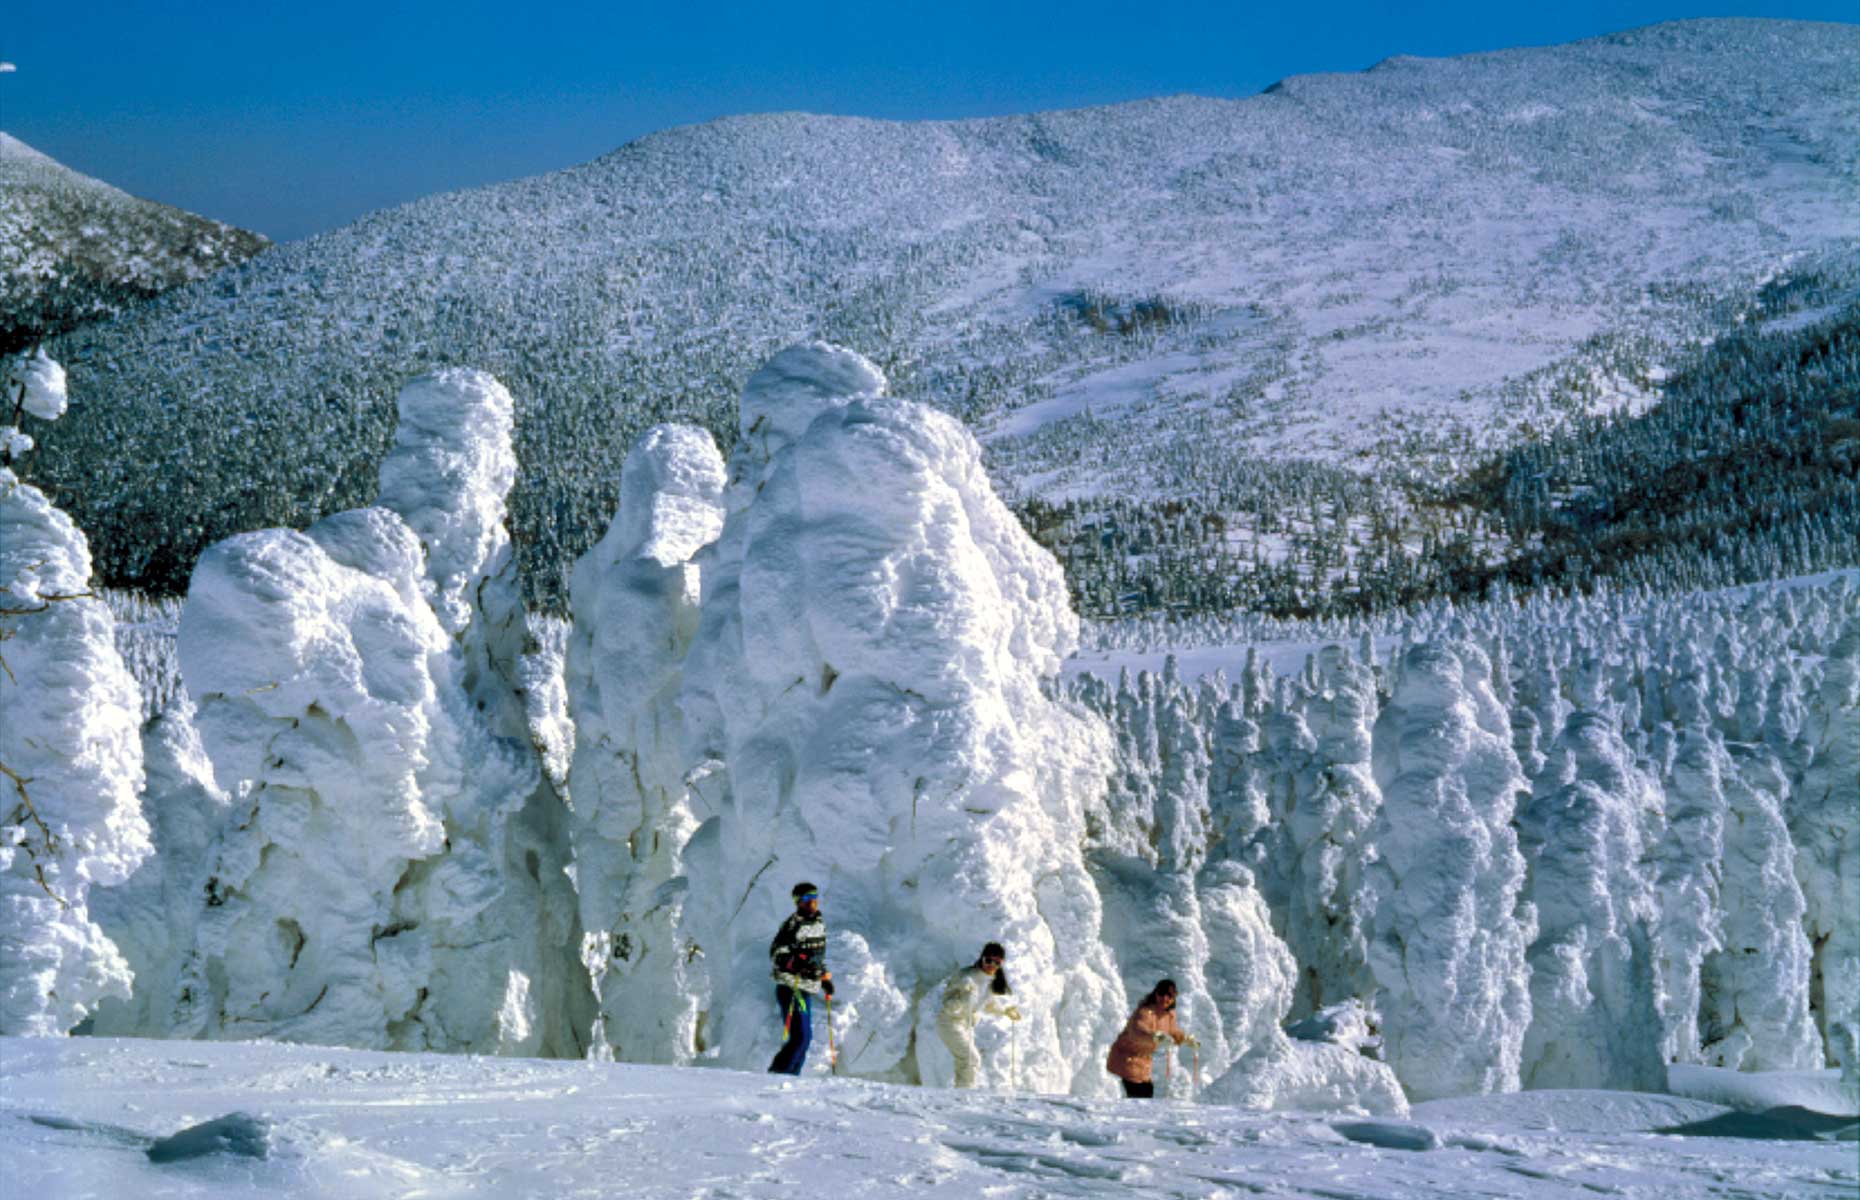 Zao Quasi National Park, is where you'll find snow monsters